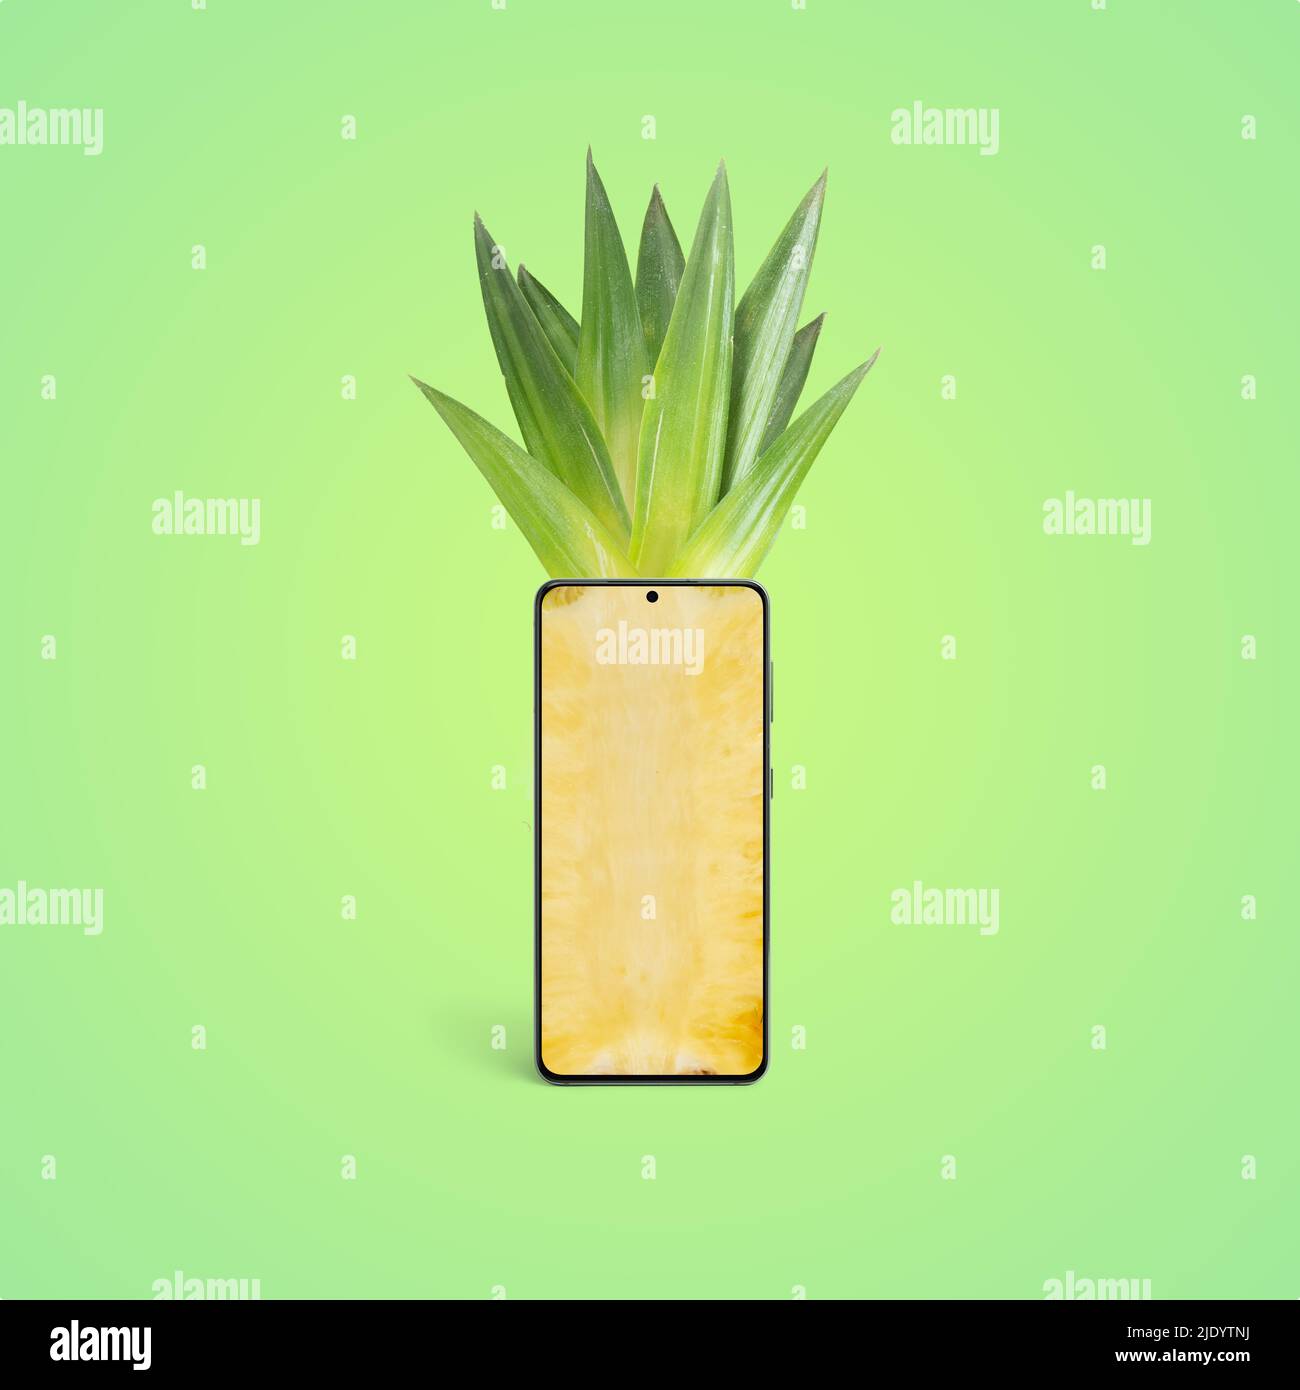 Phone like a pineapple. The display shows the juicy inside of the pineapple, above are the leaves like hair. Creactive conceptual composition on paste Stock Photo